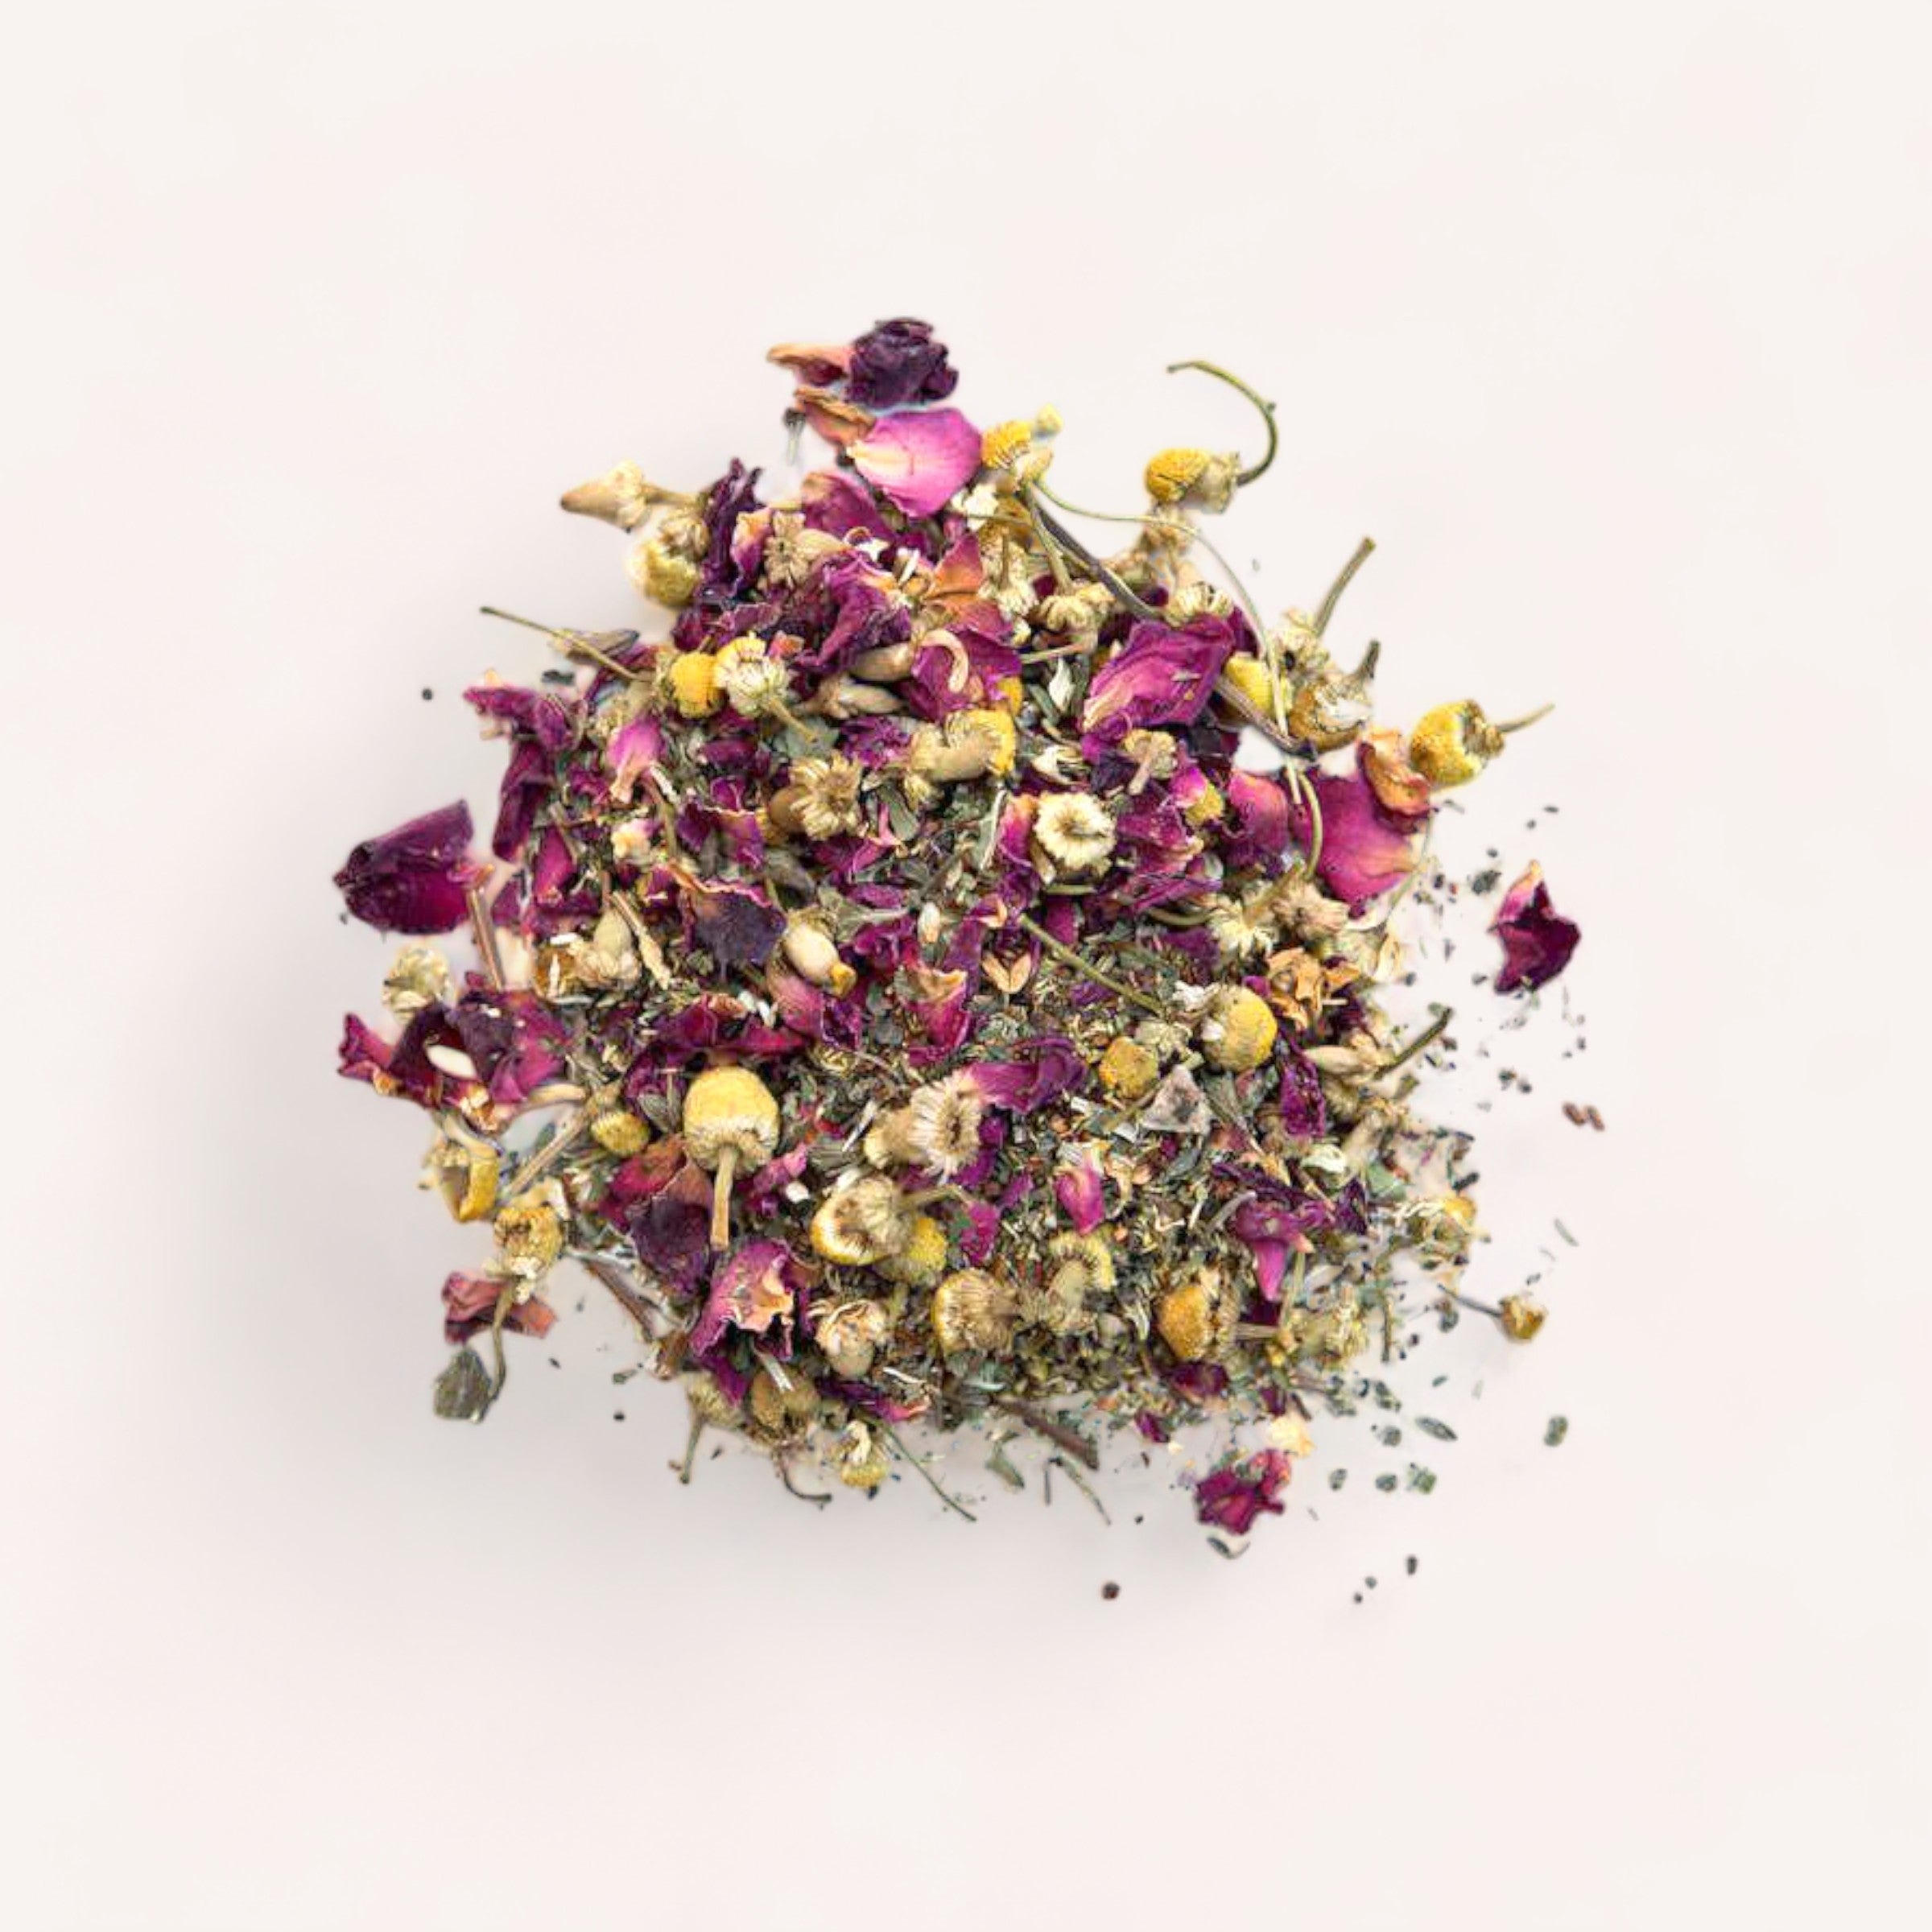 A pile of Repose Tea by Forage + Bloom on a white background, potentially used for herbal tea blends or aromatherapy.